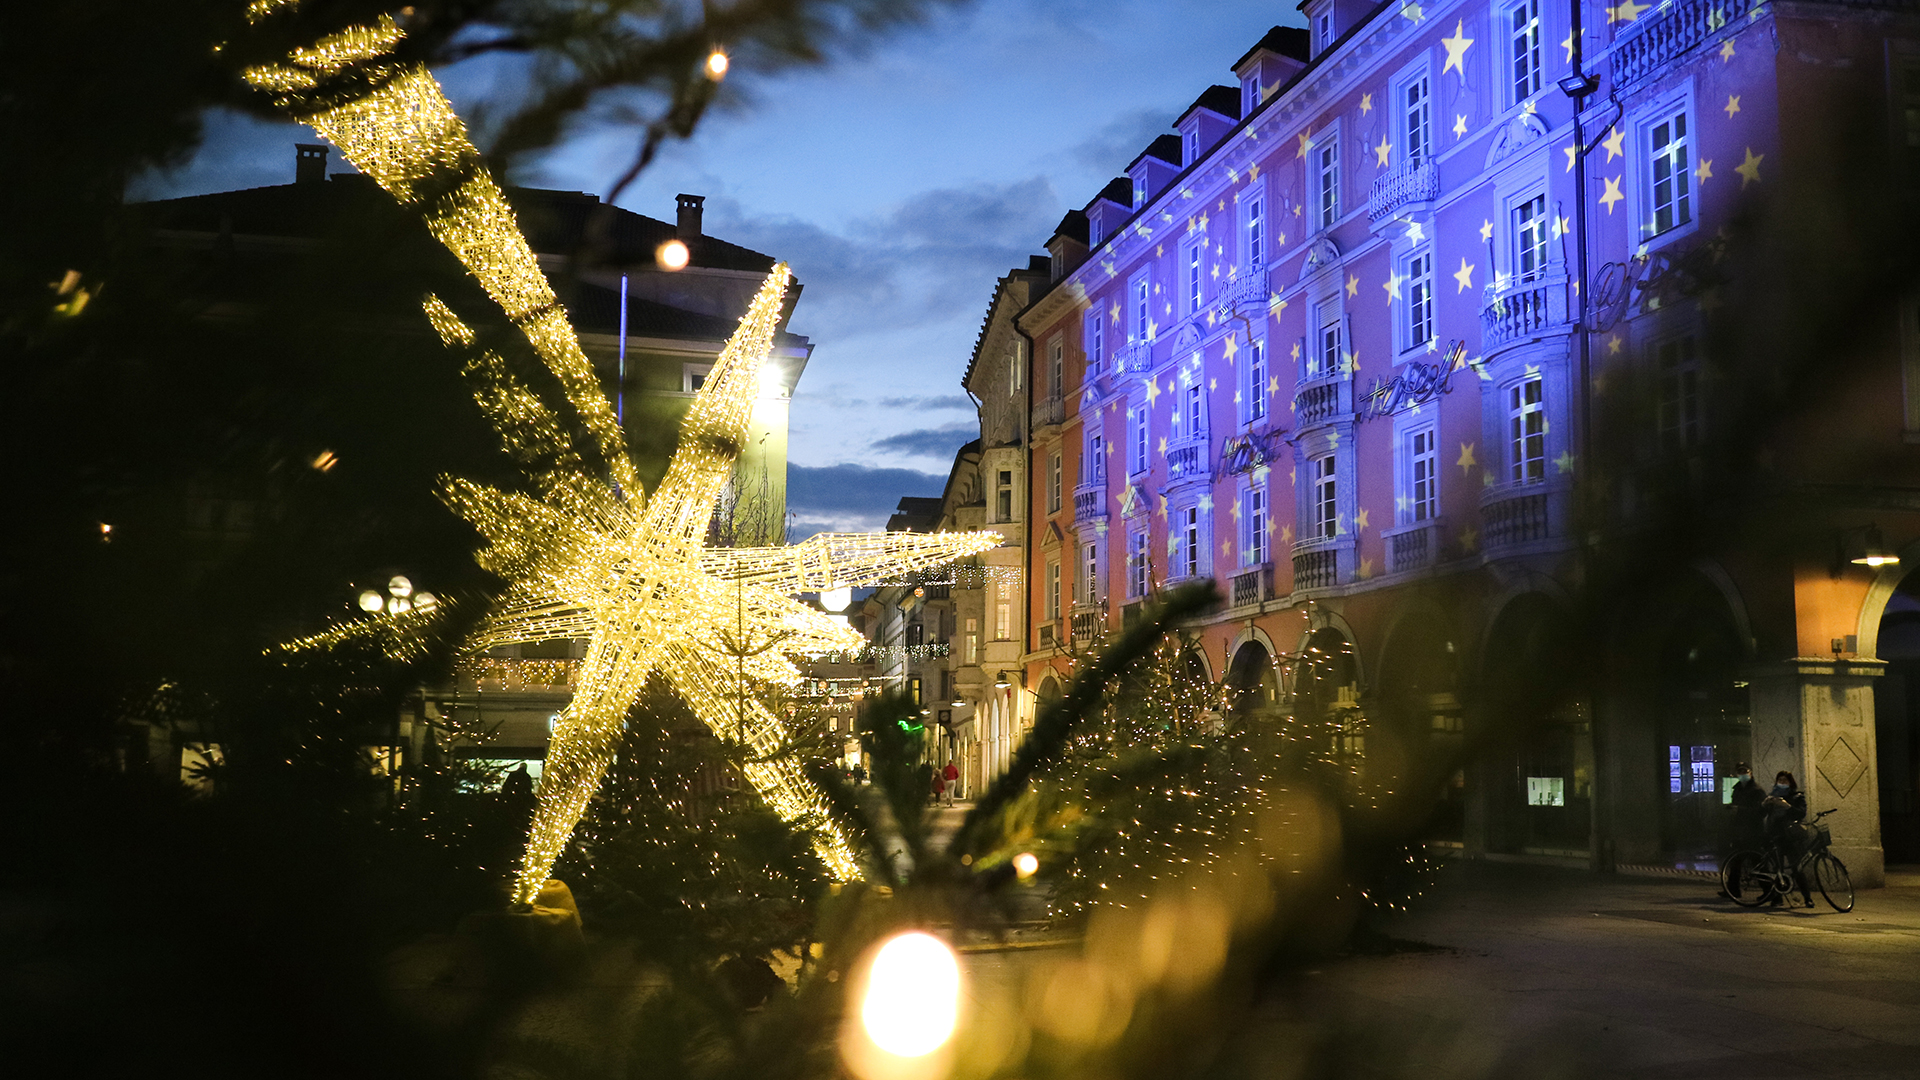 Bolzano on a Christmas evening where a star-shaped luminary stands in Walther Square and the buildings are illuminated according to the festivities.